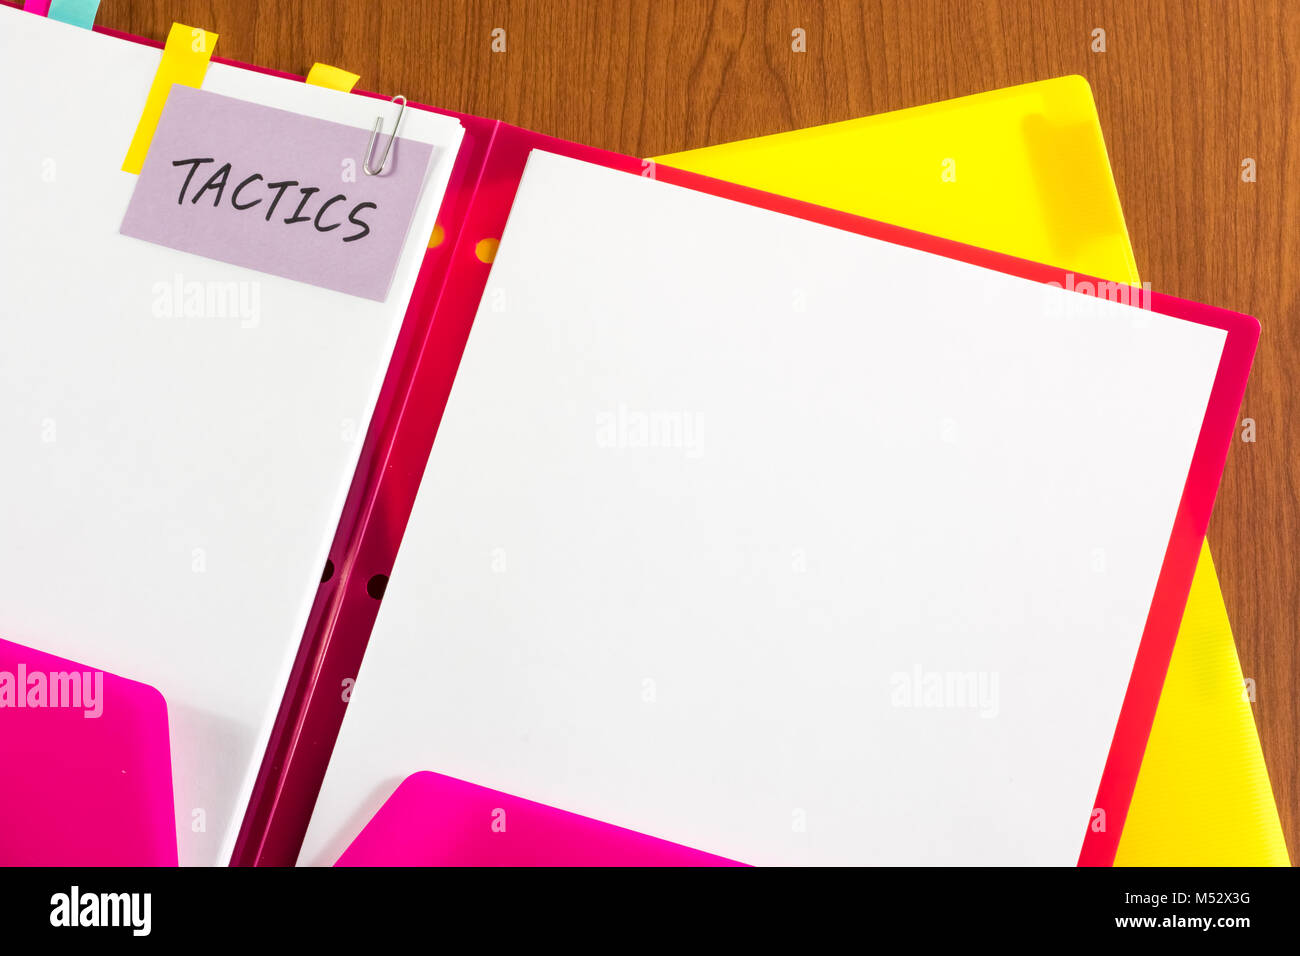 Tactics; White Blank Documents with Small Message Card. Stock Photo